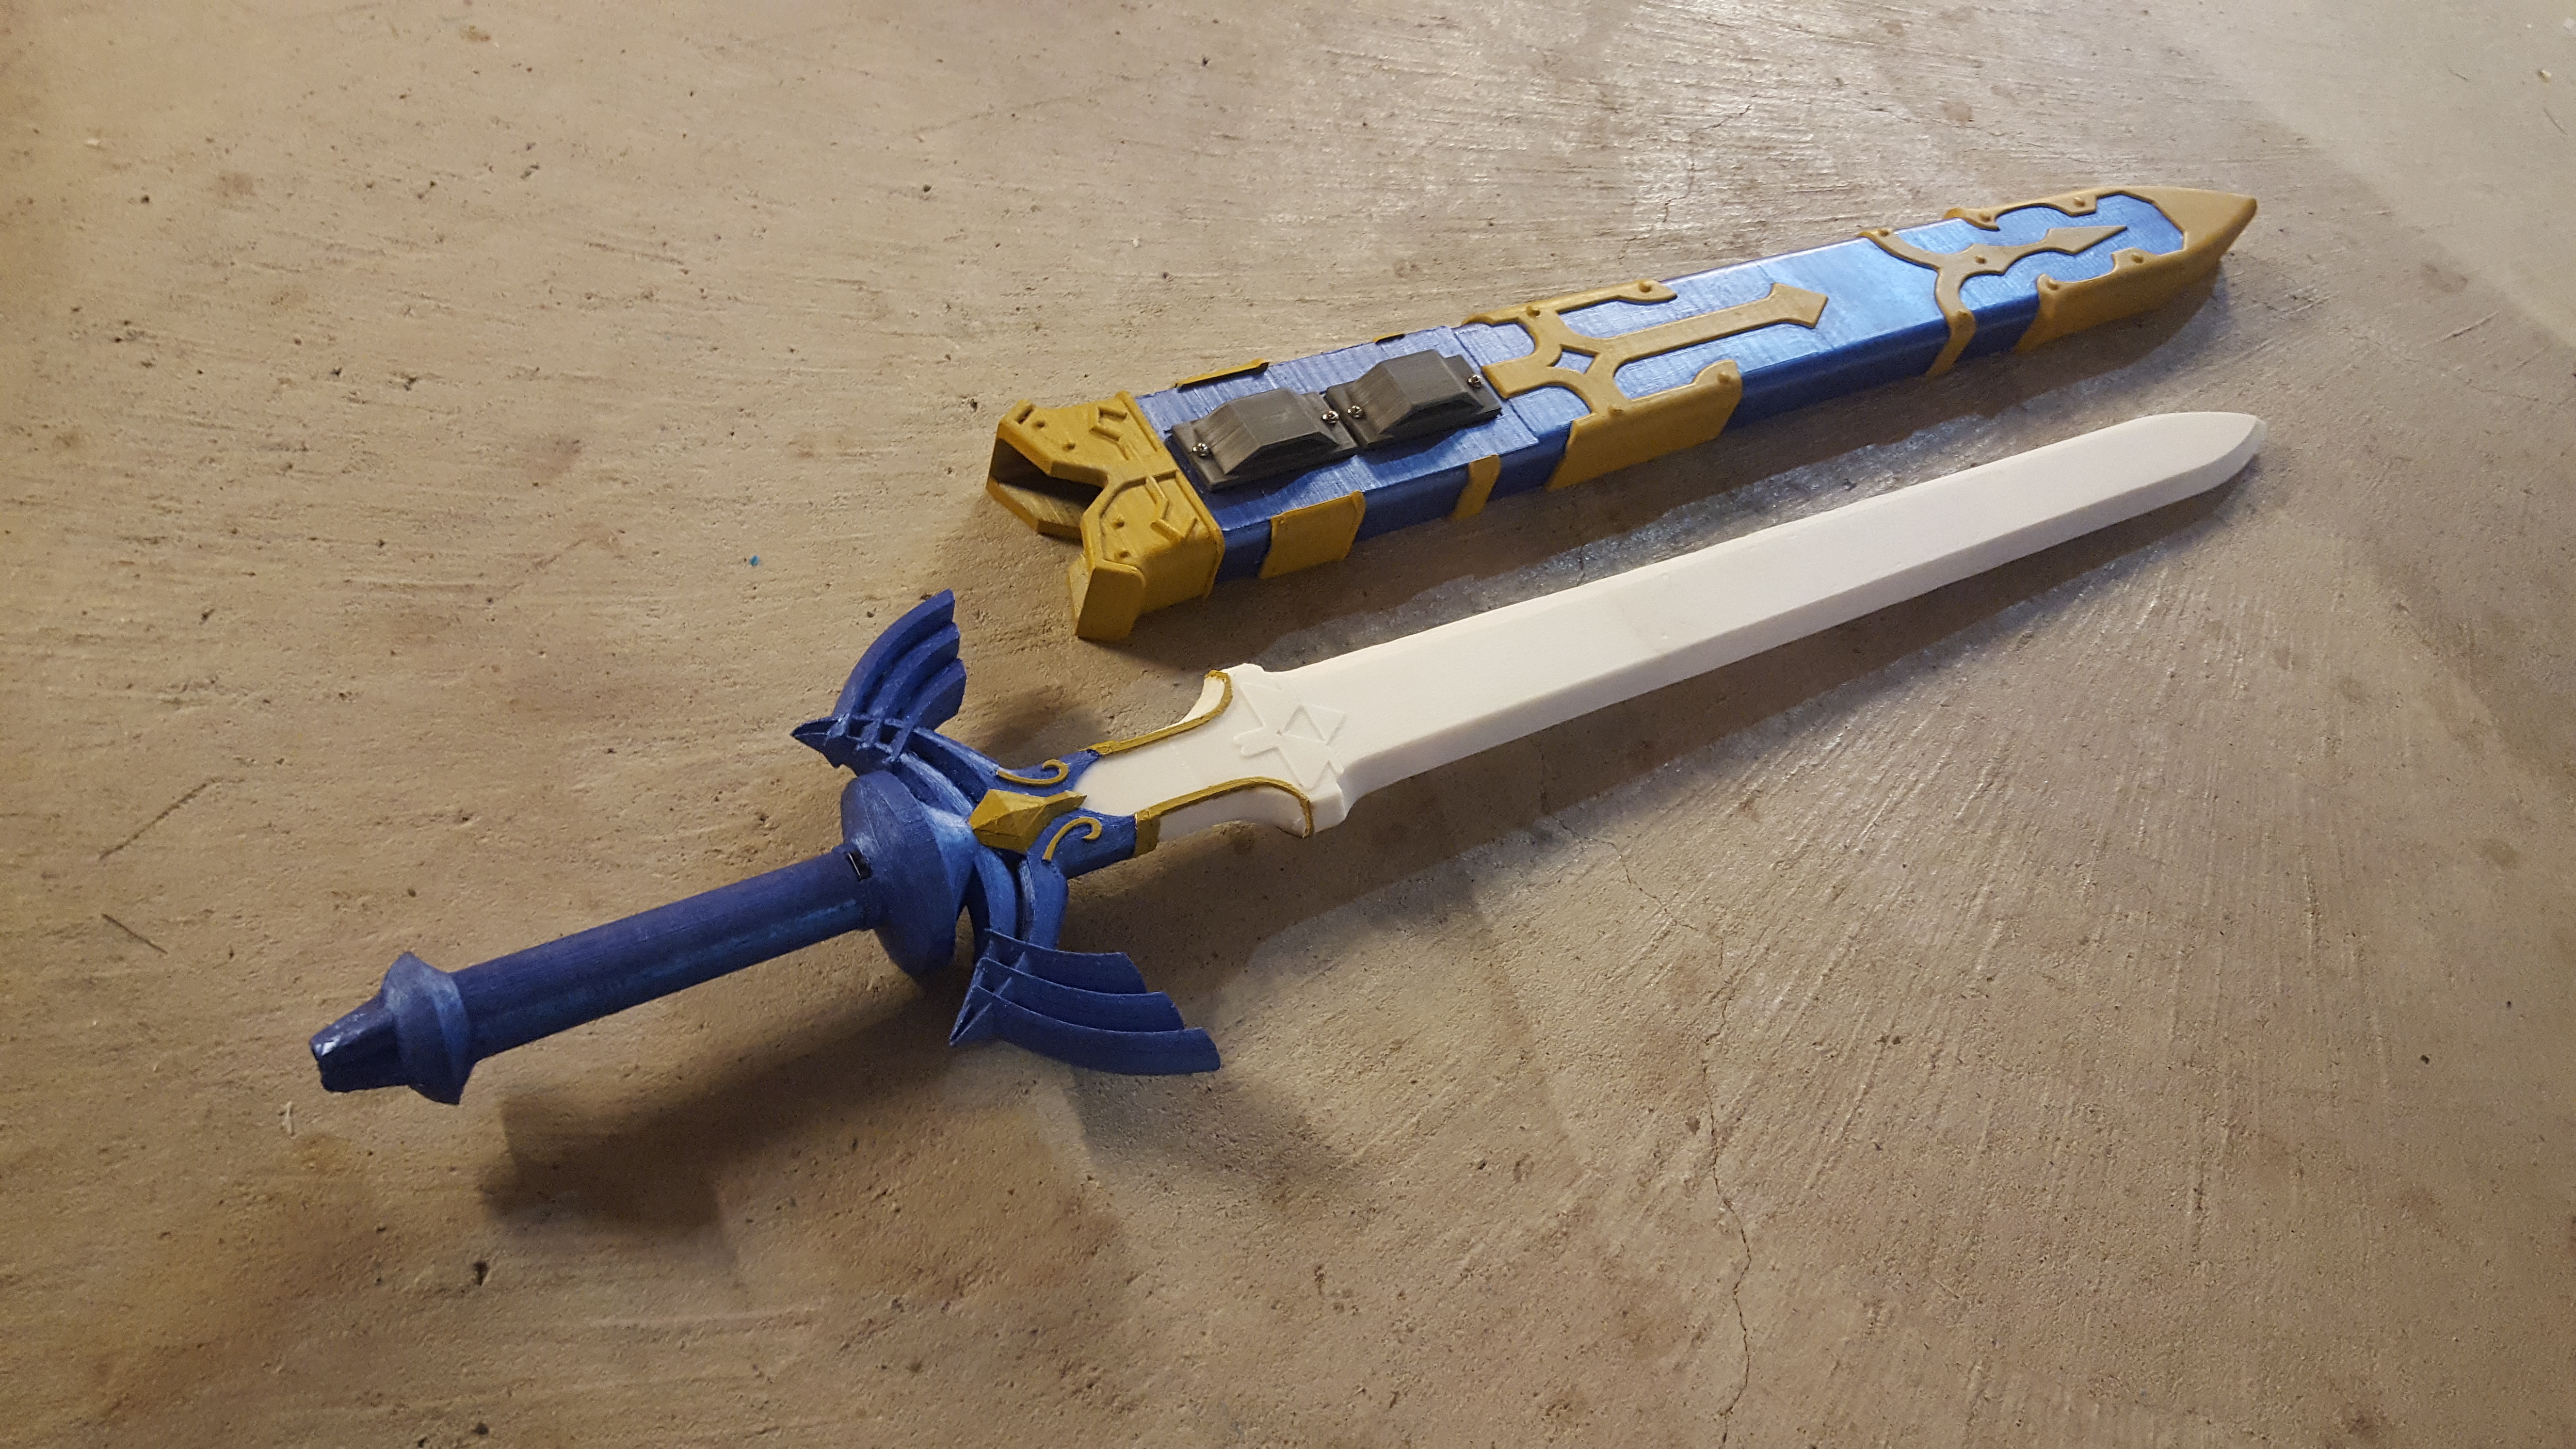 3D Printed Glowing Master Sword [REMIX] by Anima3D